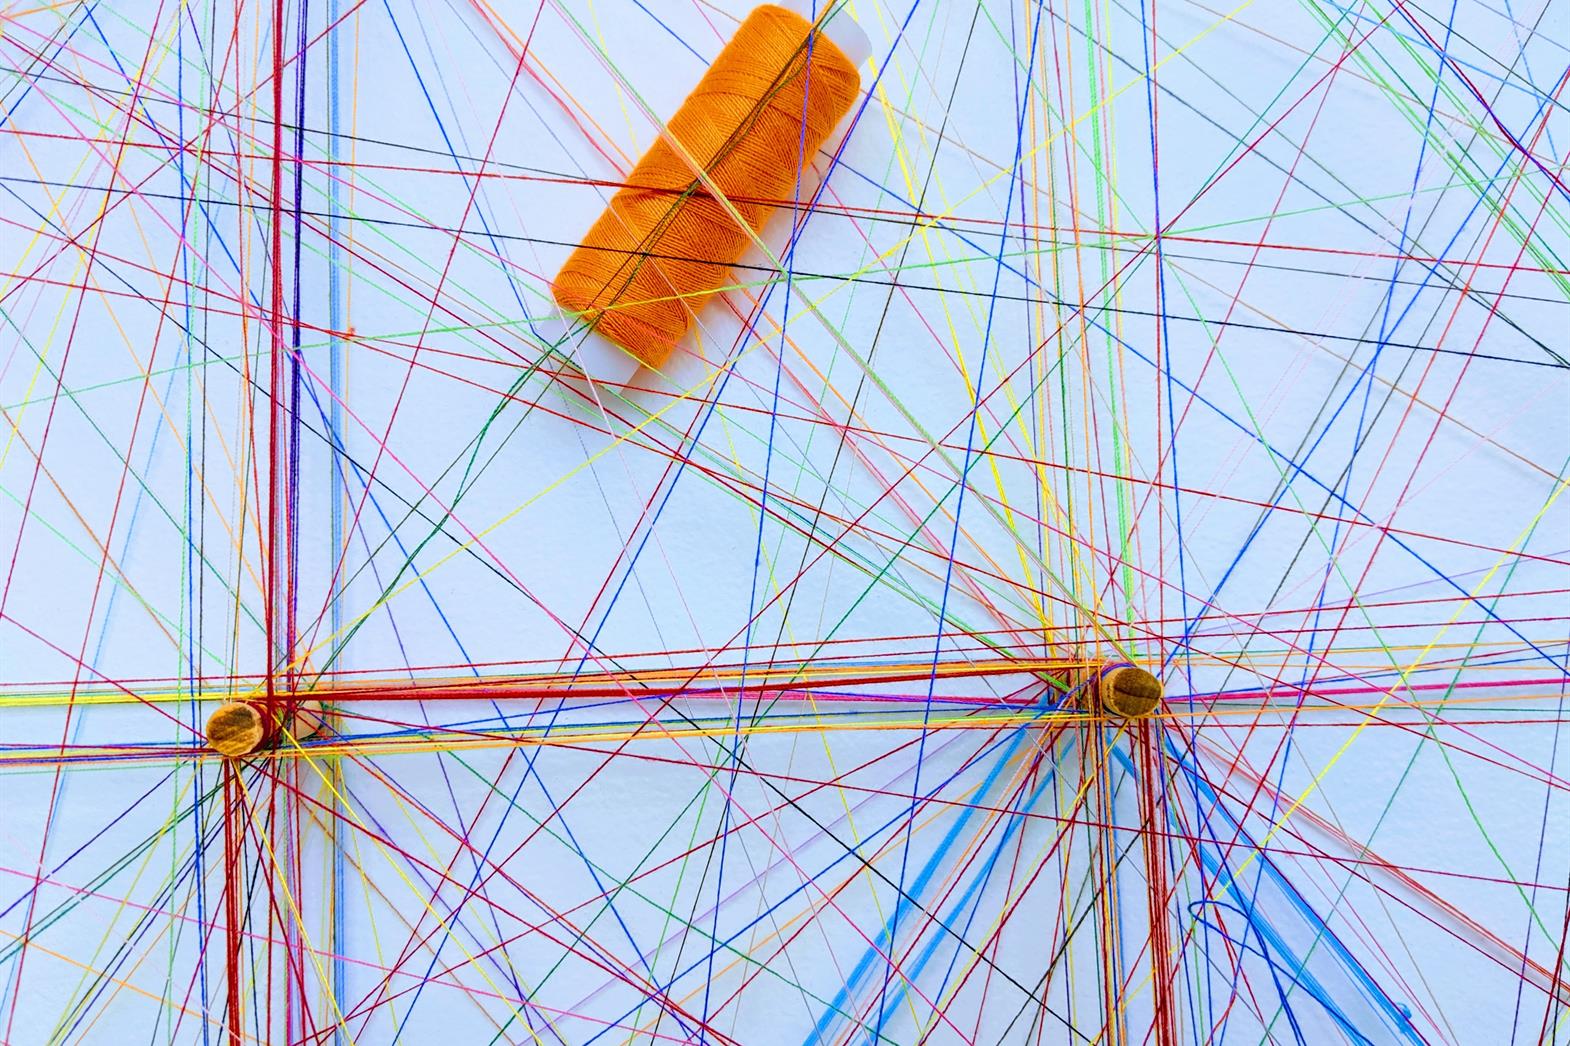 Strings of different colours tied in a web pattern